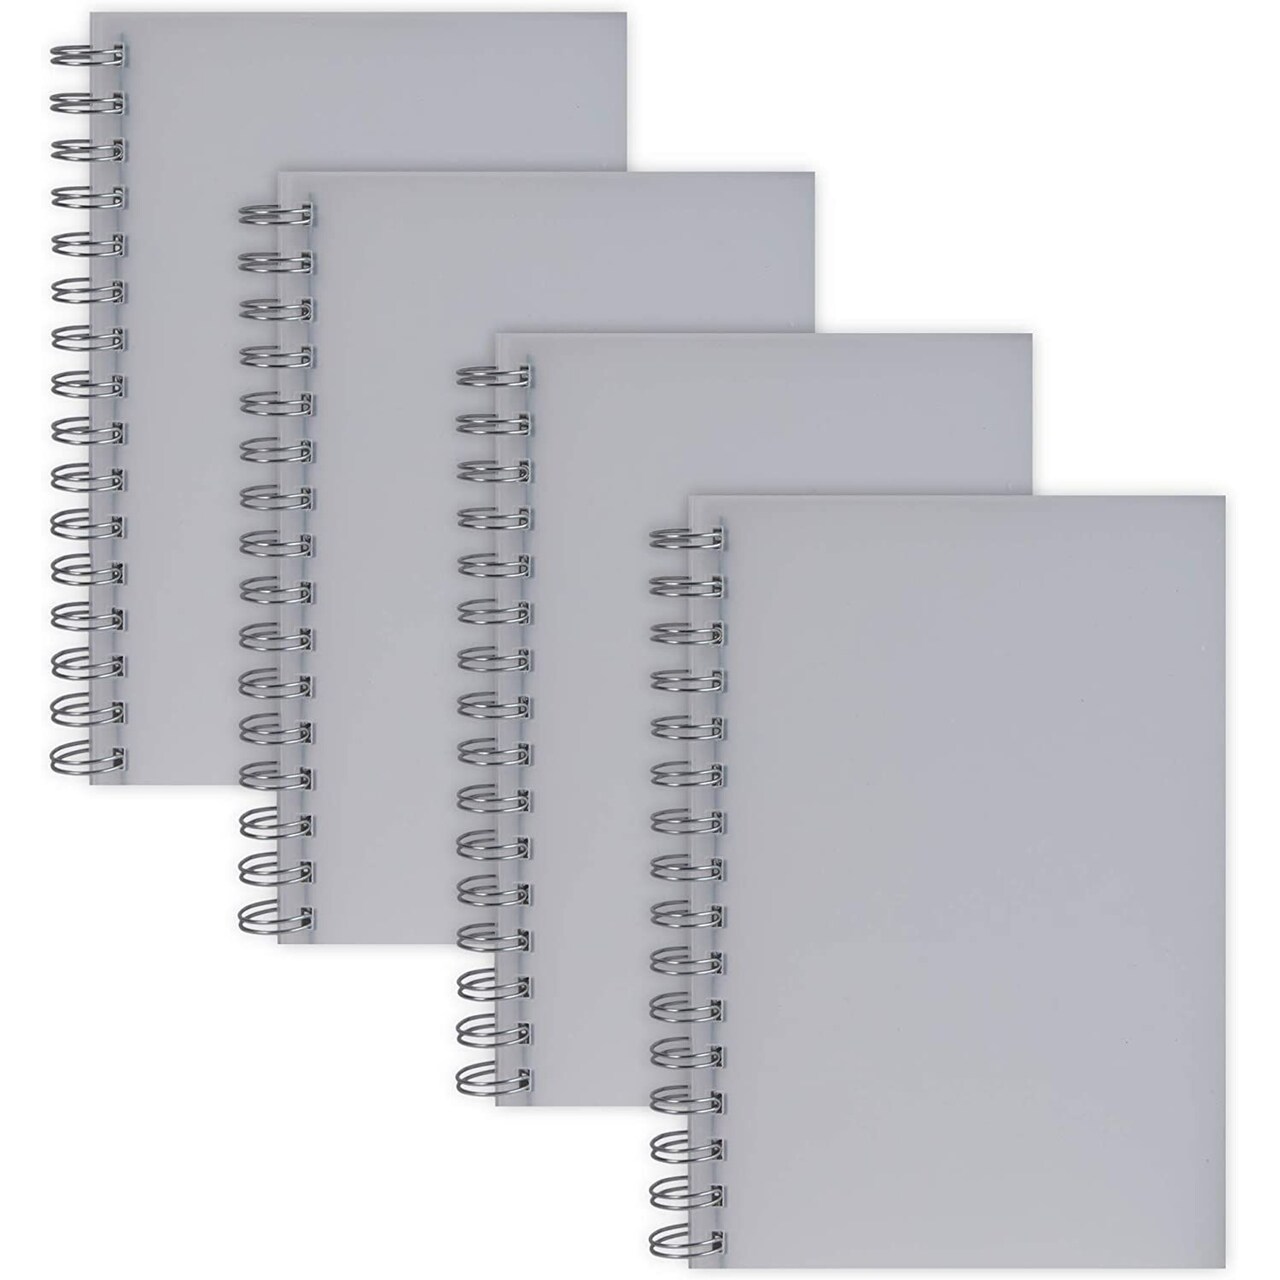 Blank Spiral Bound Notebooks, 80 Sheets, Unlined (5.7 x 8.3 in, 4 Pack)